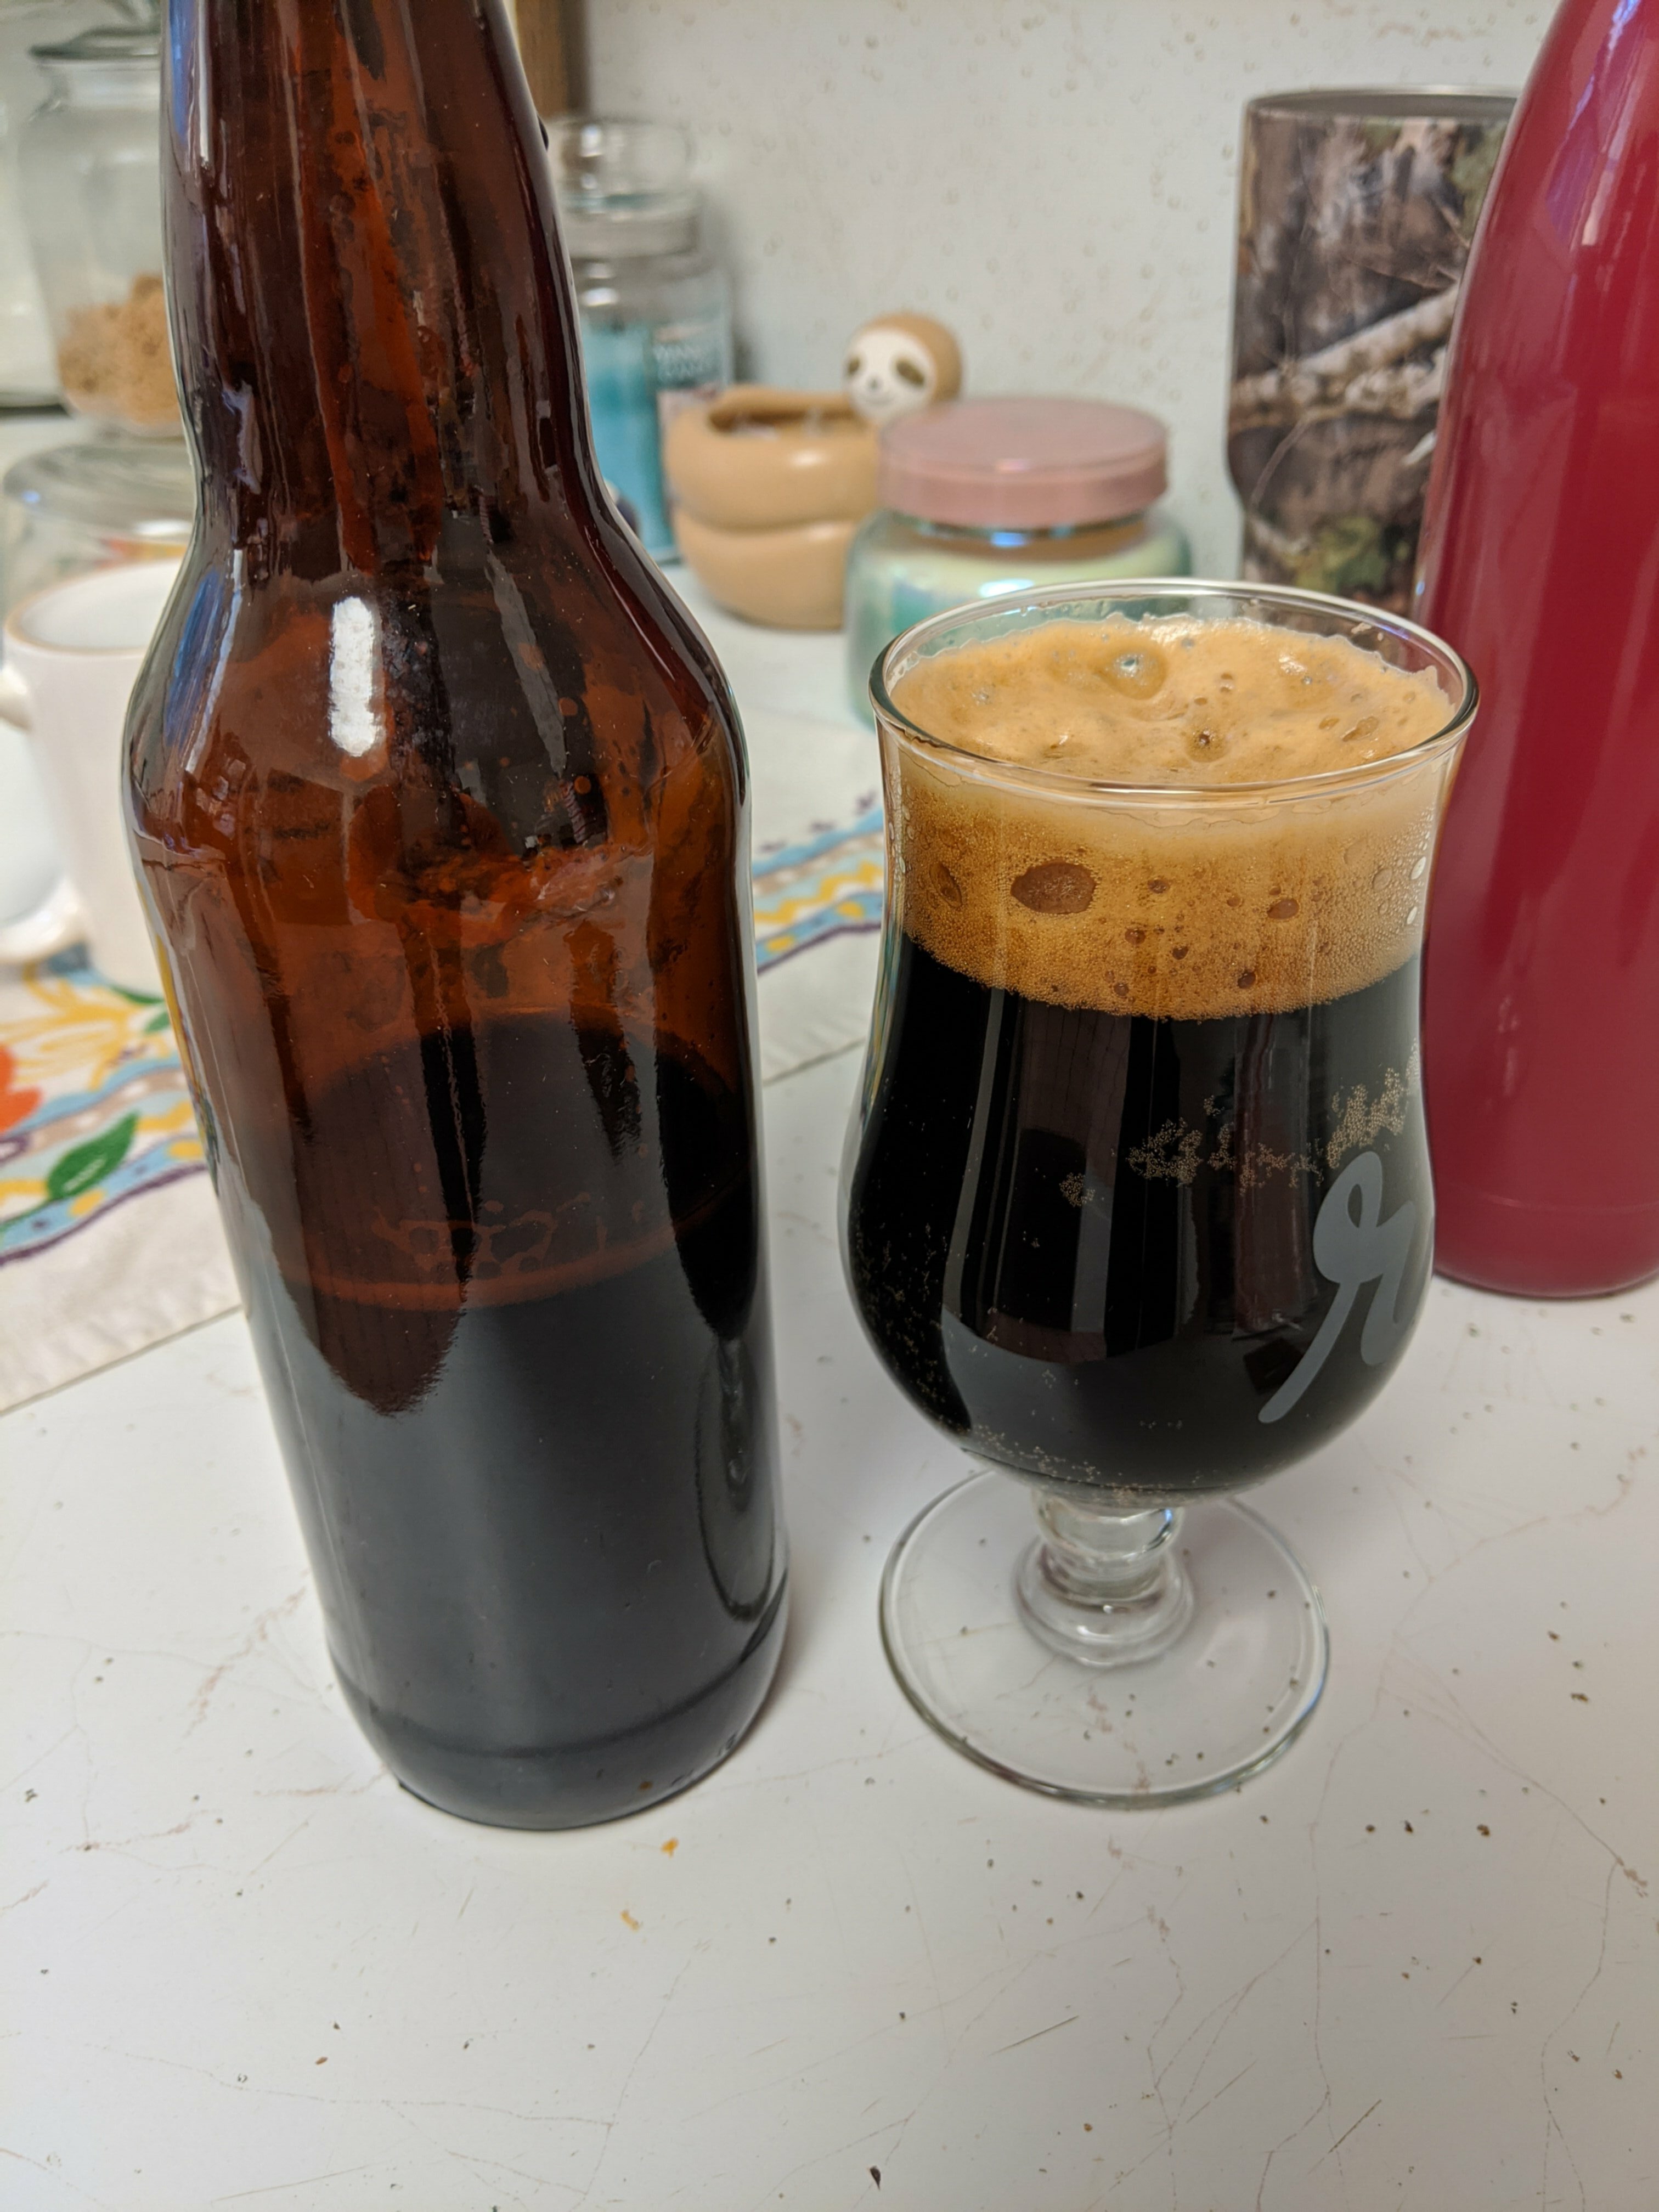 The finished beer. The head came out just right in my opinion and it poured very nicely. I should have rinsed my glassware out first though. Rookie mistake!